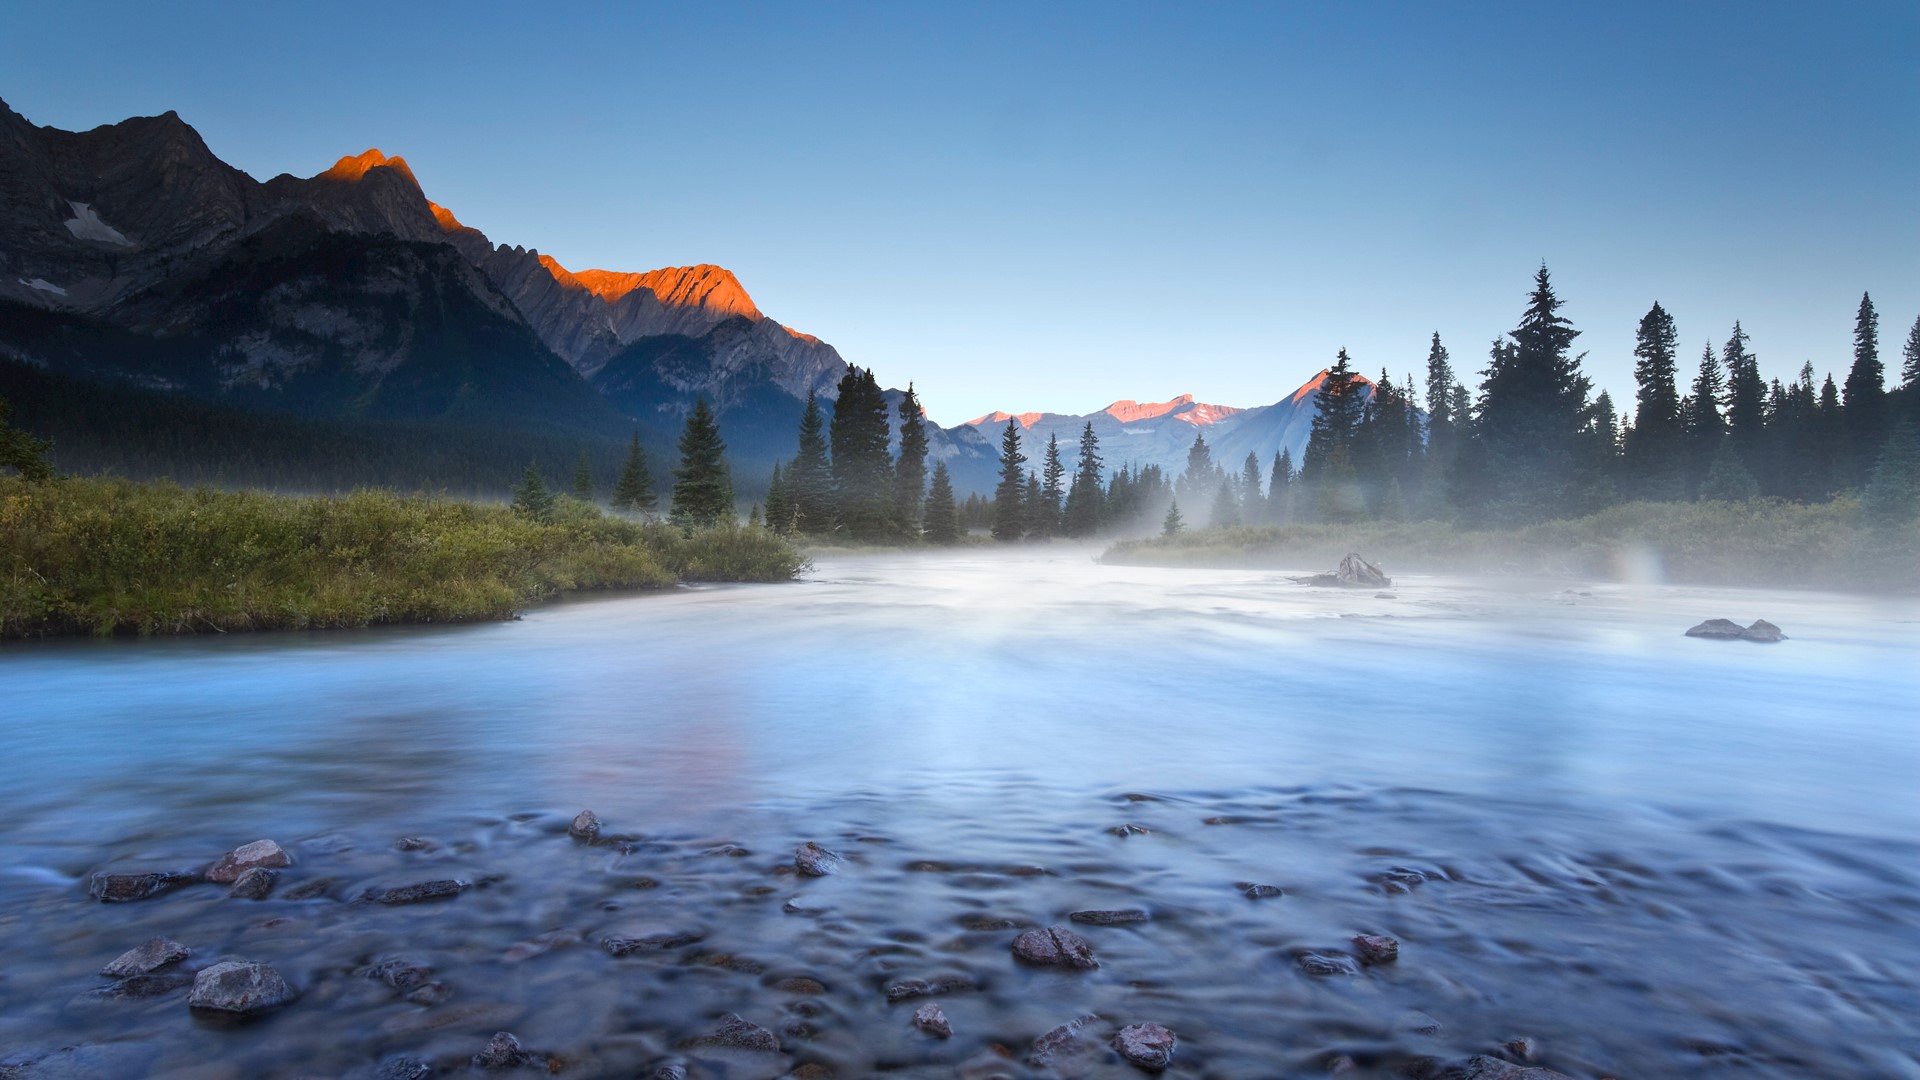 General 1920x1080 nature landscape trees mountains rocks water river mist clear sky sunrise long exposure British Columbia Canada